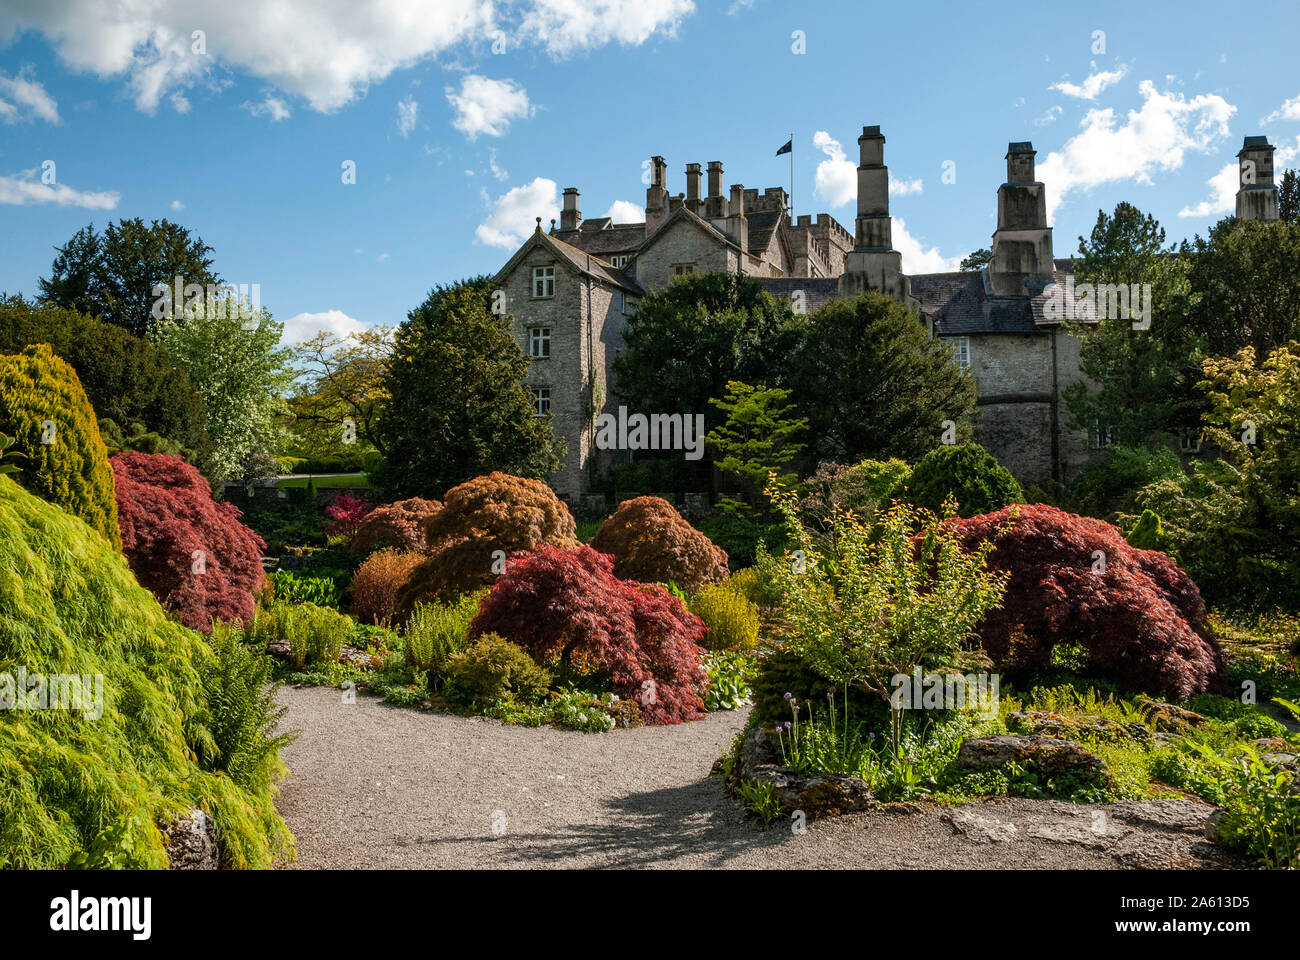 Sizergh Castle and Garden, South Kendal, Cumbria, England, United Kingdom, Europe Stock Photo